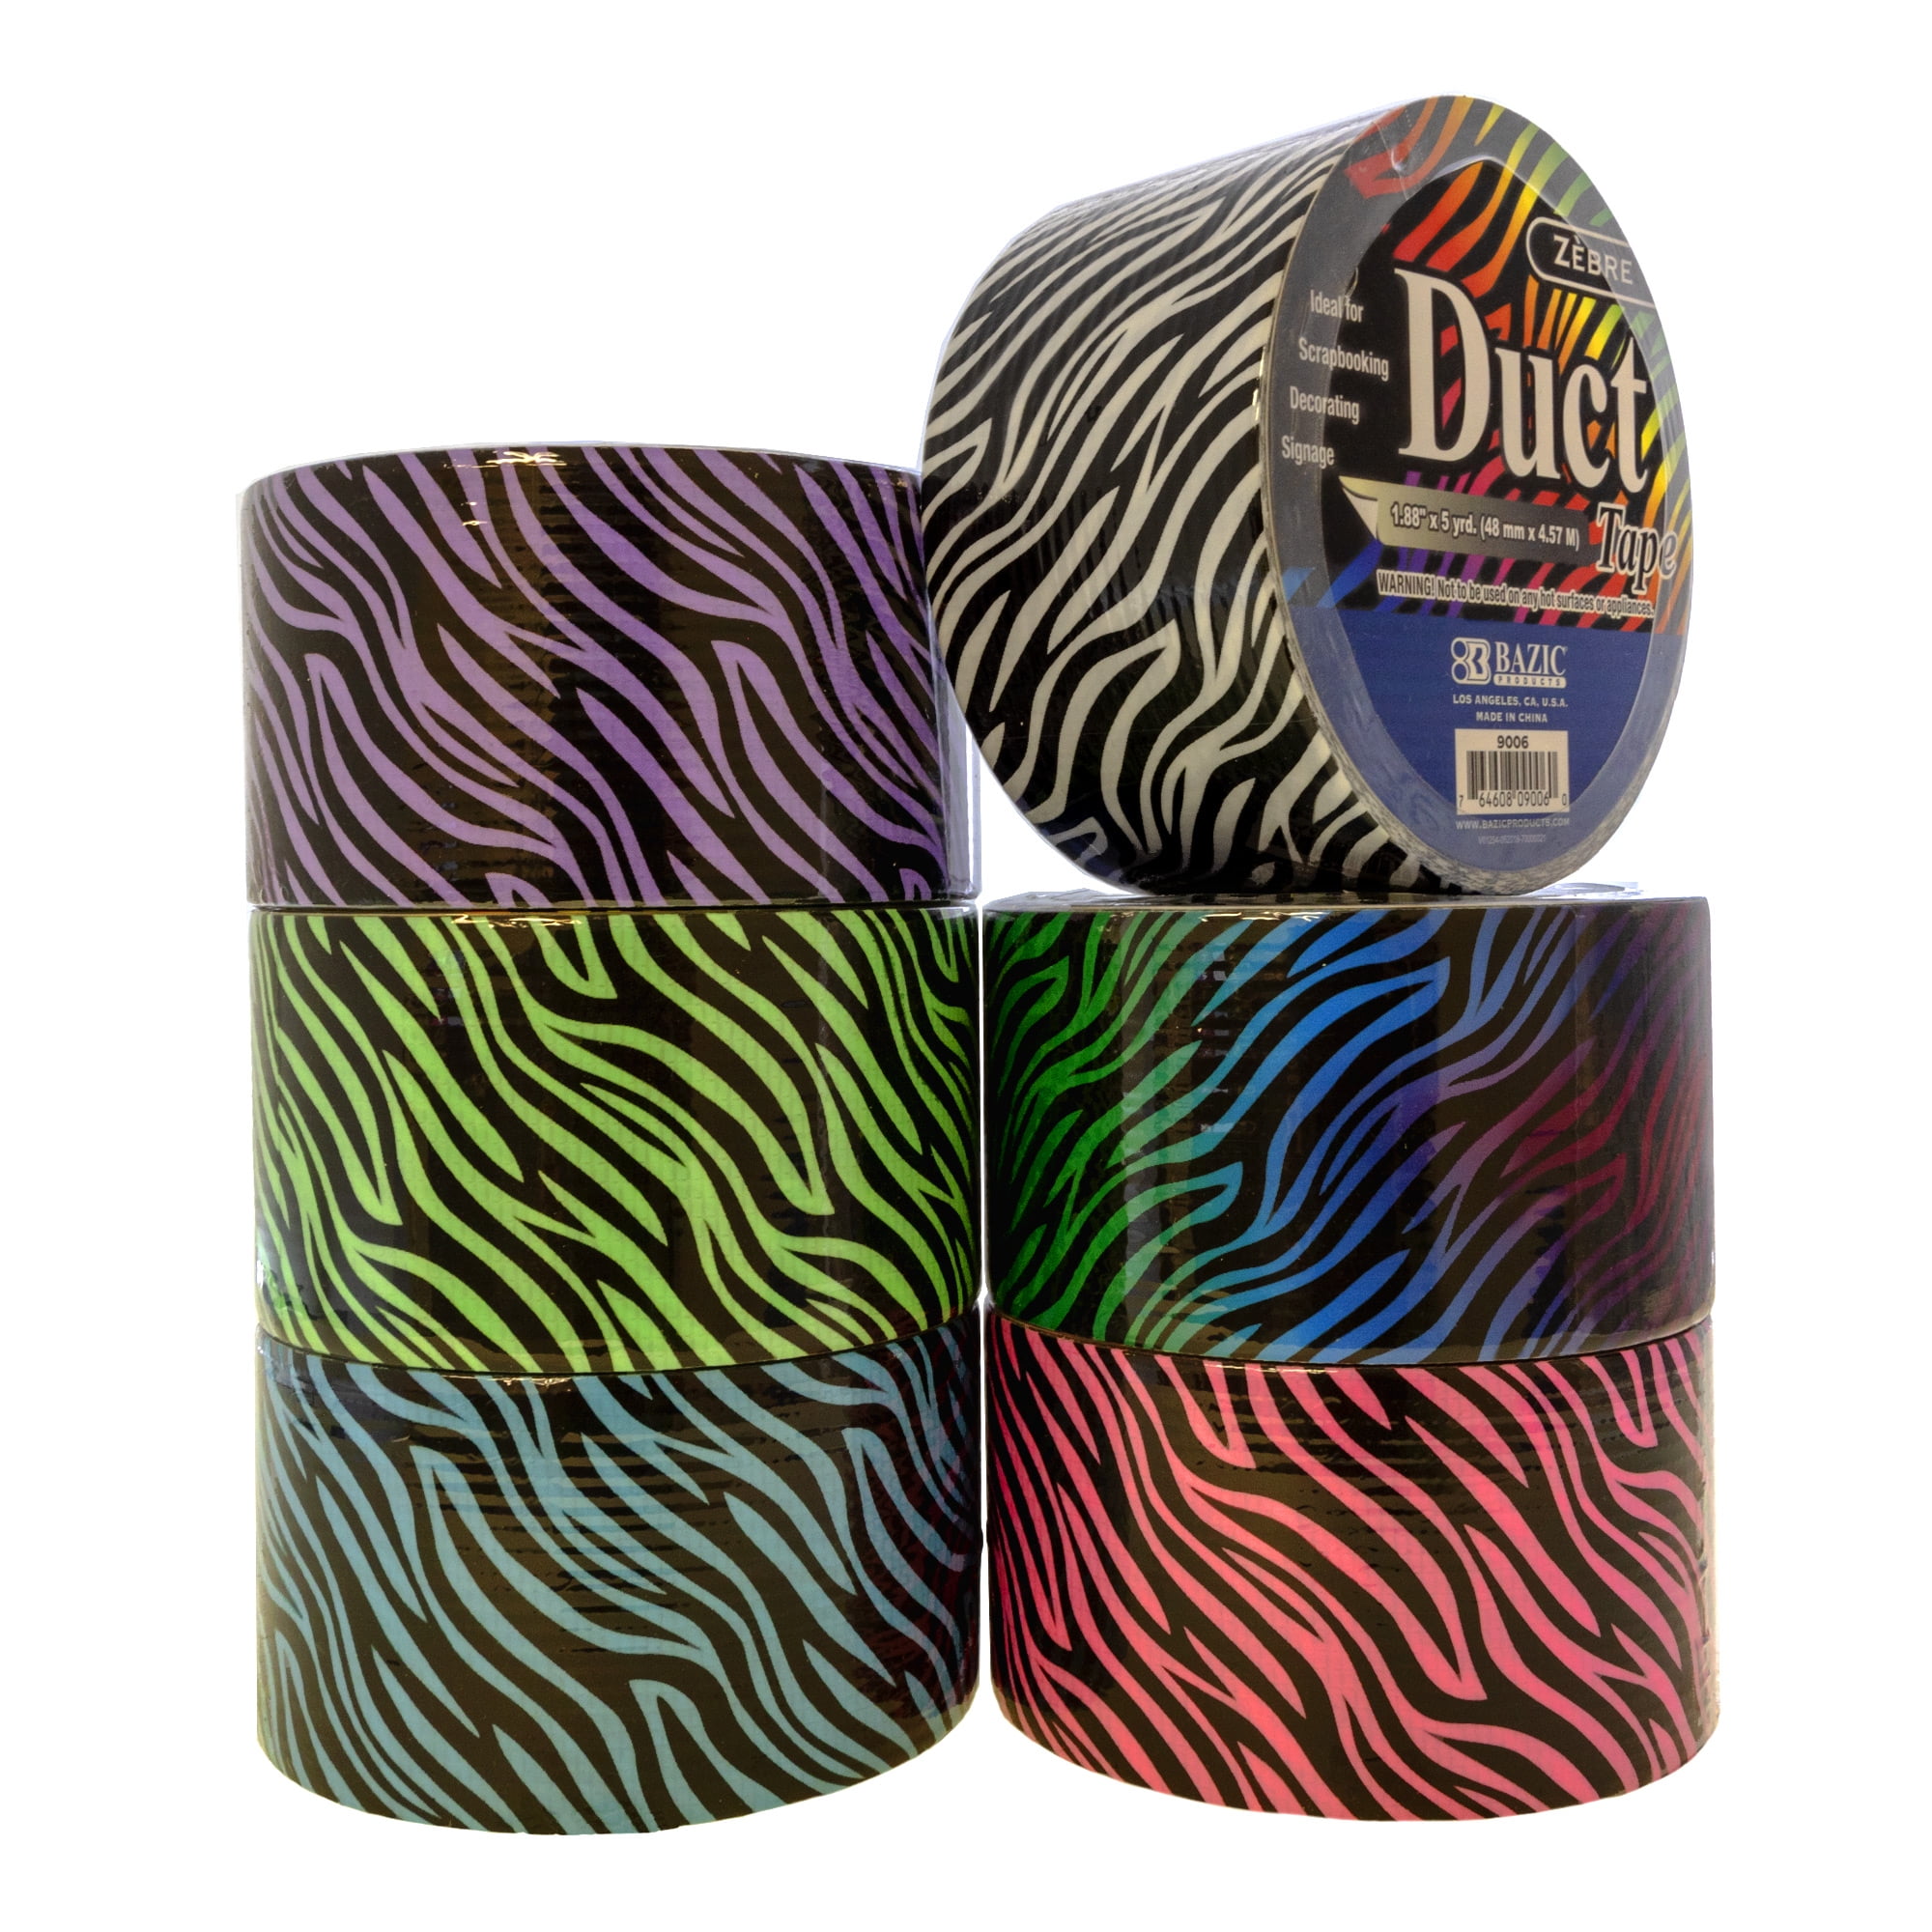 BAZIC Printed Duct Tape Plaid Pattern 1.88 X 5 Yards, 24-Pack 